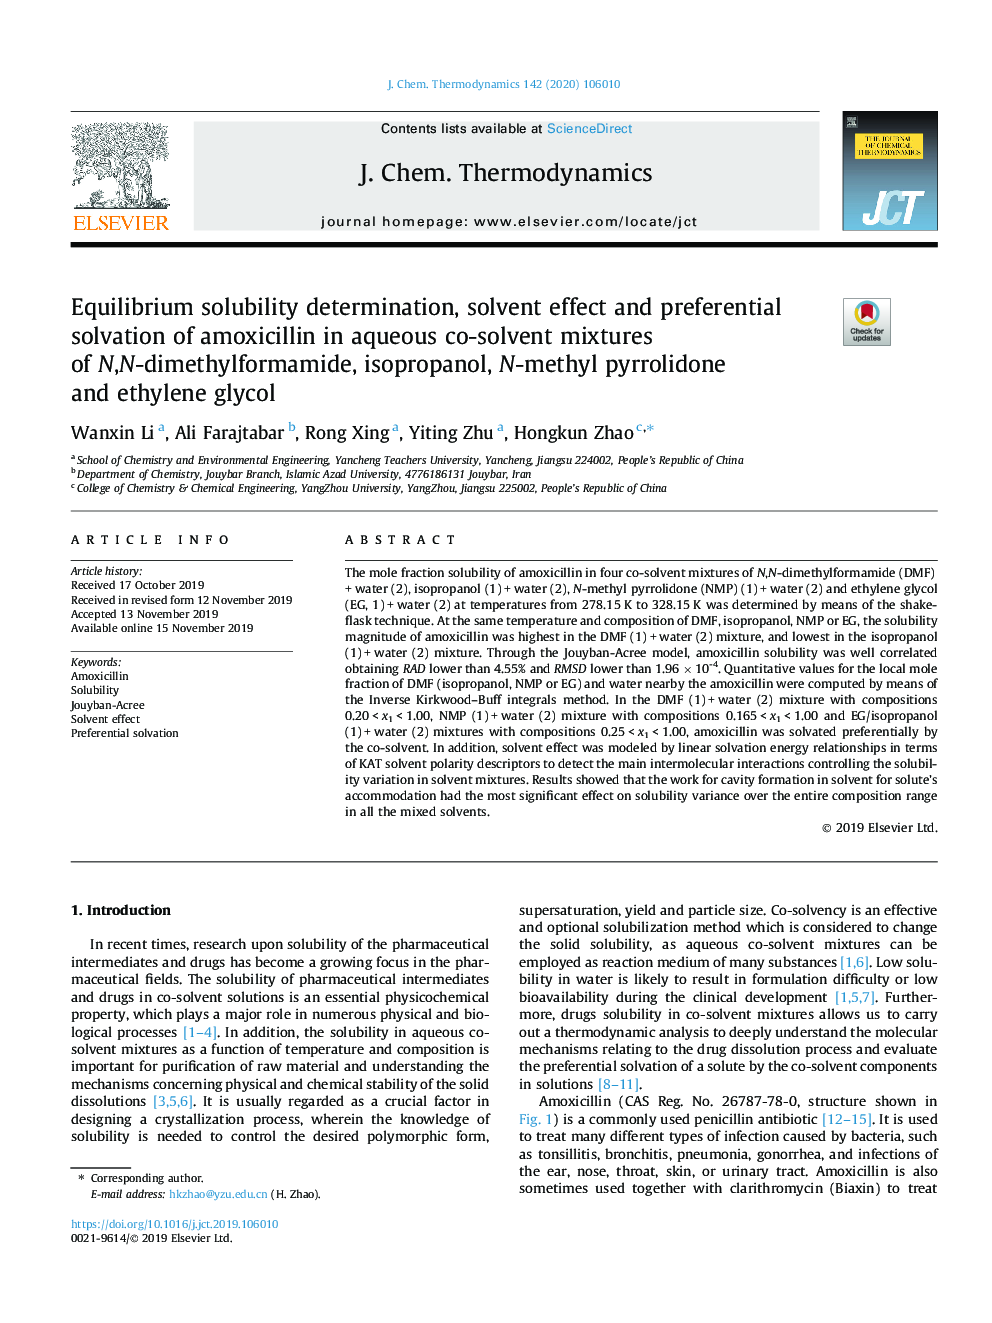 Equilibrium solubility determination, solvent effect and preferential solvation of amoxicillin in aqueous co-solvent mixtures of N,N-dimethylformamide, isopropanol, N-methyl pyrrolidone and ethylene glycol